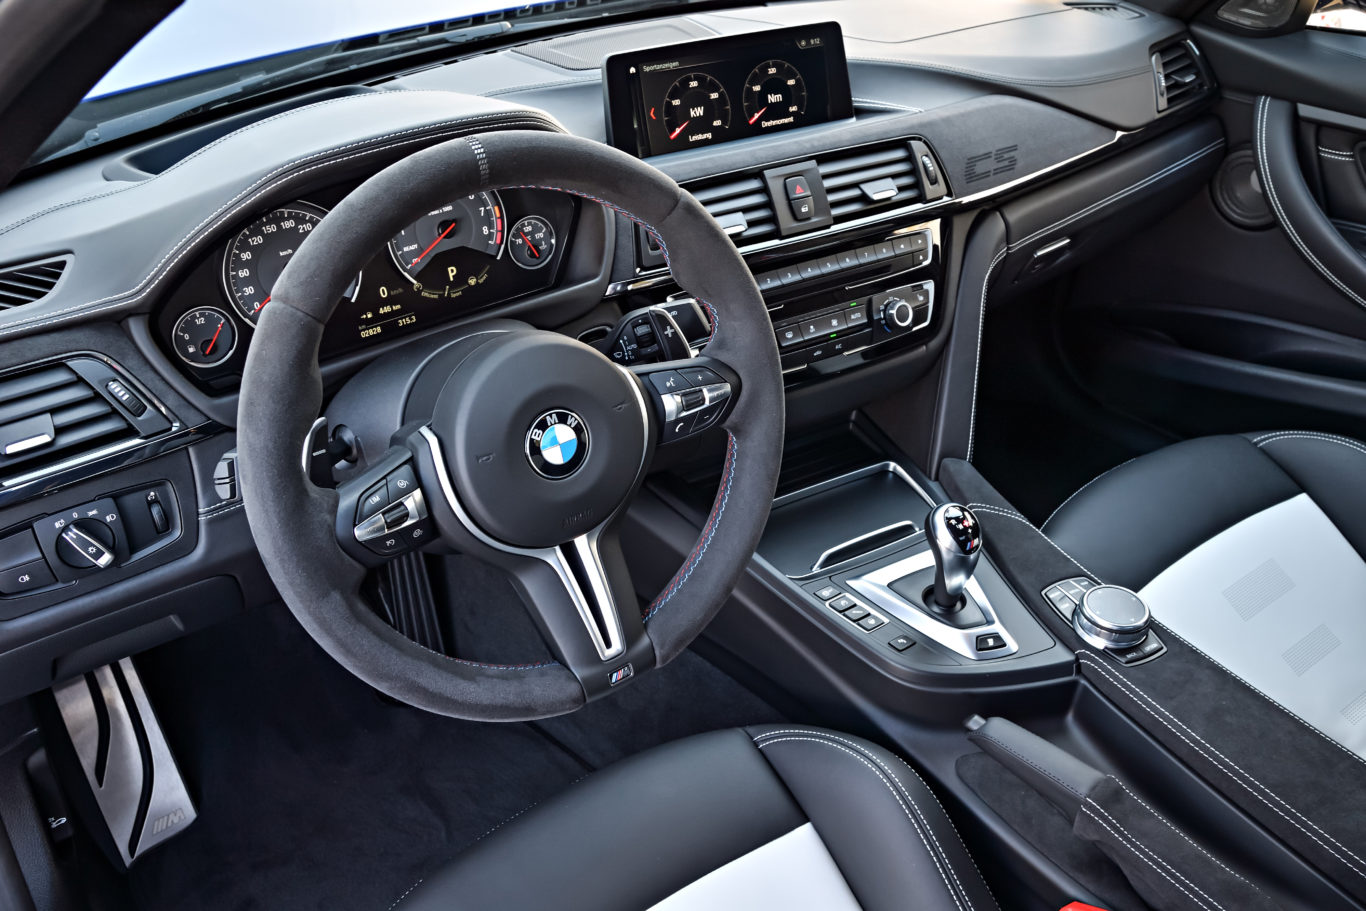 The interior of the CS is similar to the regular M3's